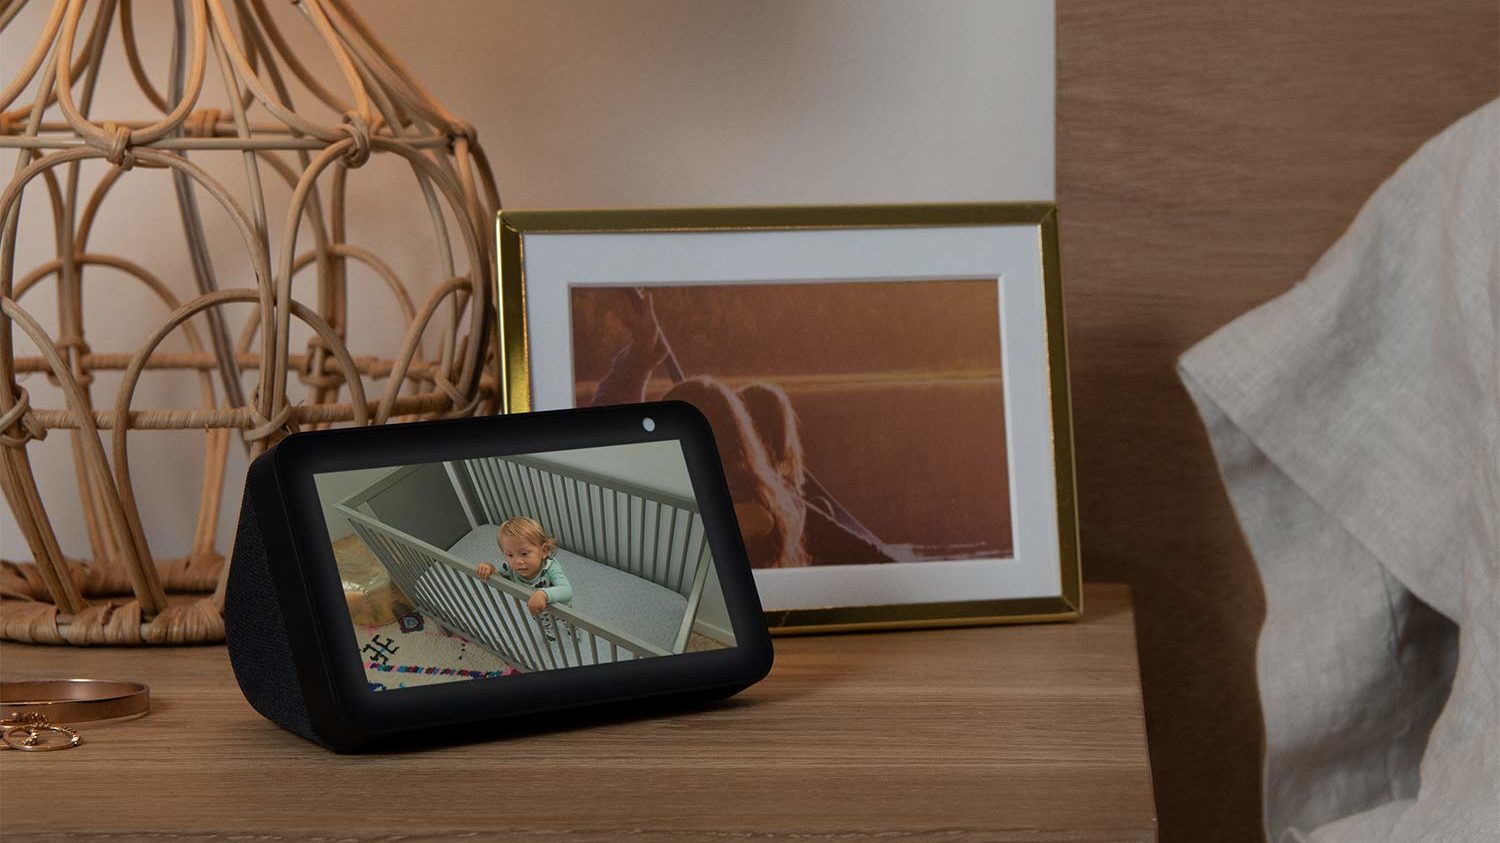 Echo Show 5 takes on the Nest Hub, brings a smart display to your  desk - Android Authority